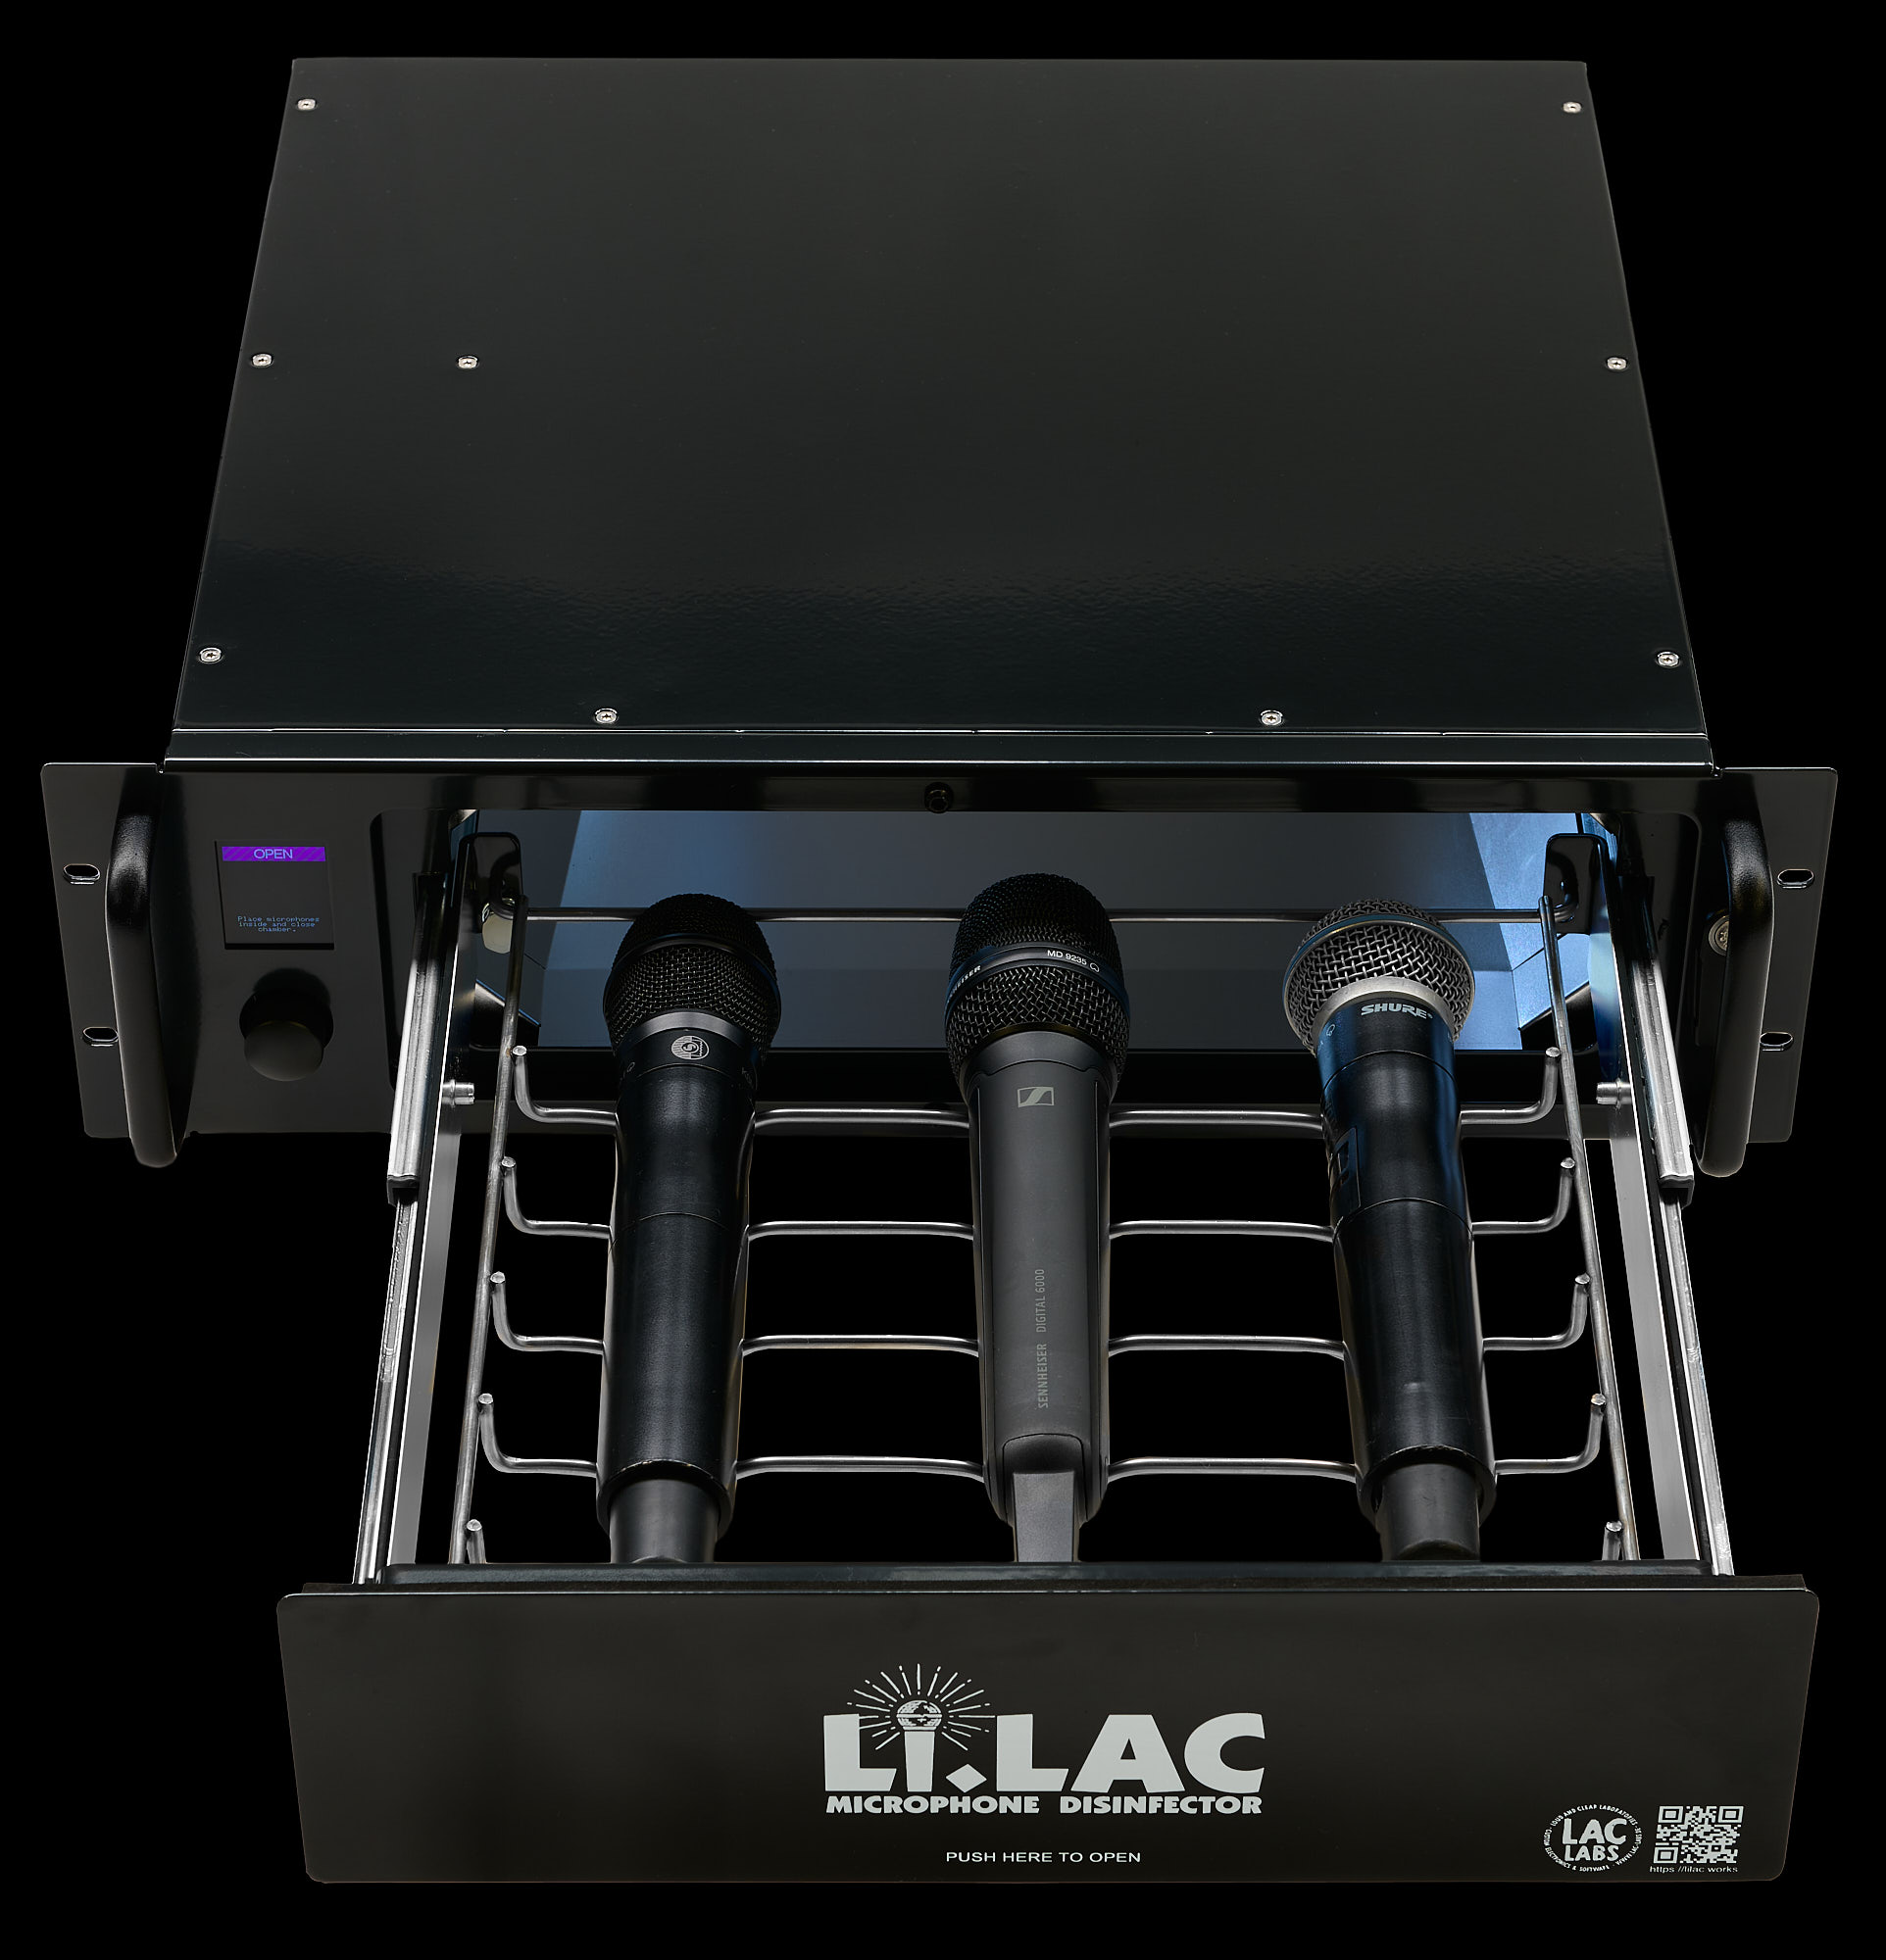 Li.LAC microphone disinfector front top view open